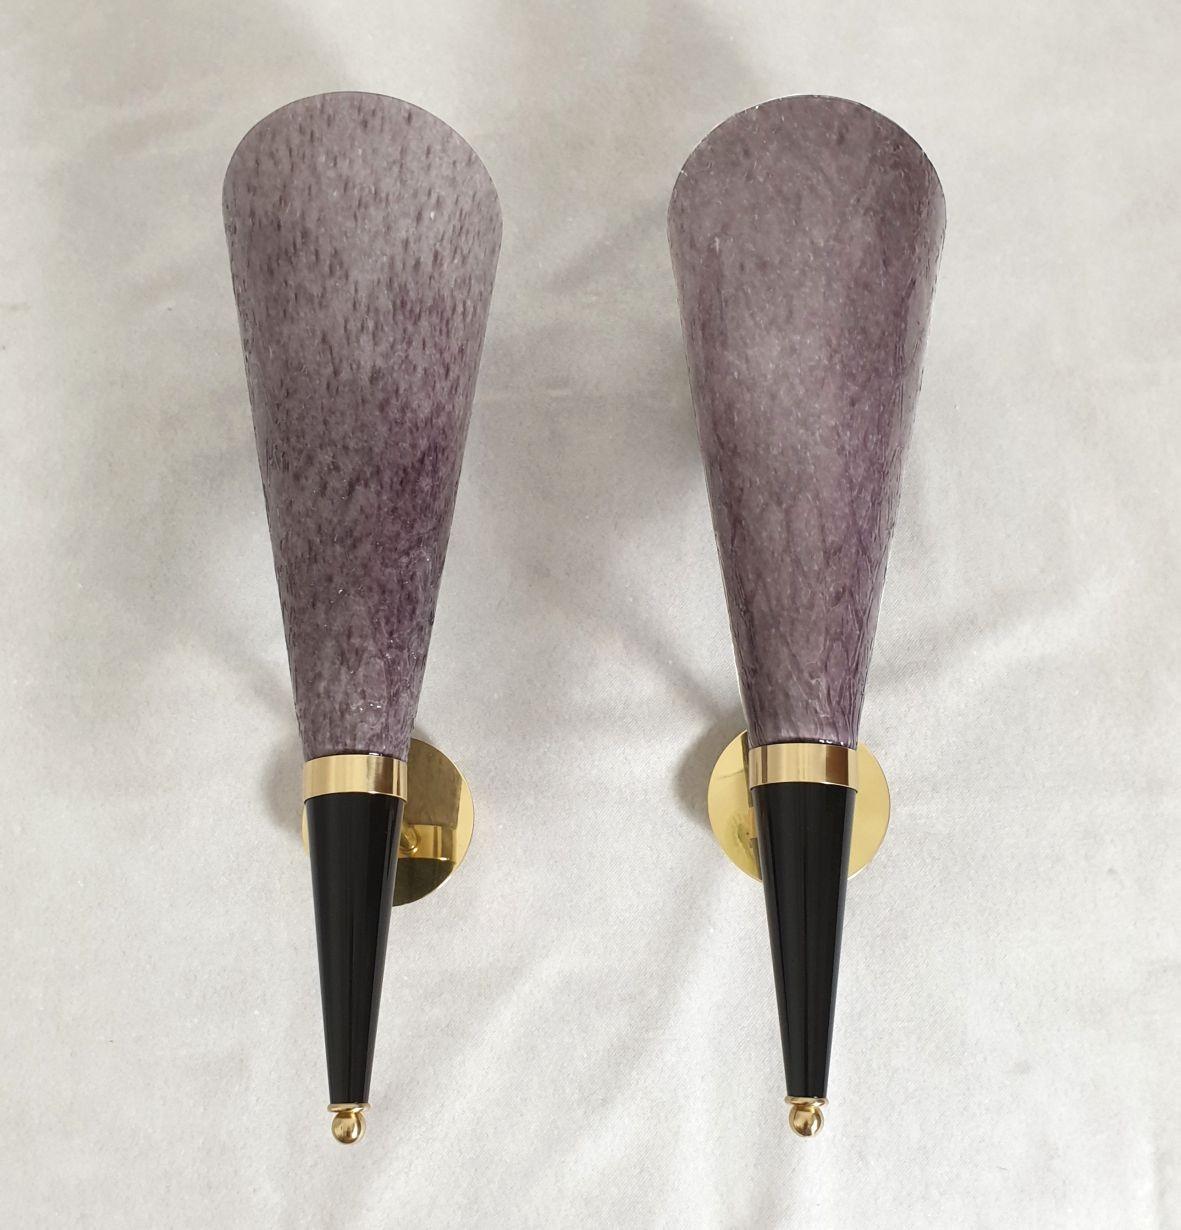 Pair of tall purple Murano glass and brass sconces by Mila Schon, Italy Mid Century Modern. Circa 1970.
The sconces are stamped: Mila Schon, Arte Vetro di Murano, on the glasses.
The sconces are tall, made of a purple textured Murano glass cone,